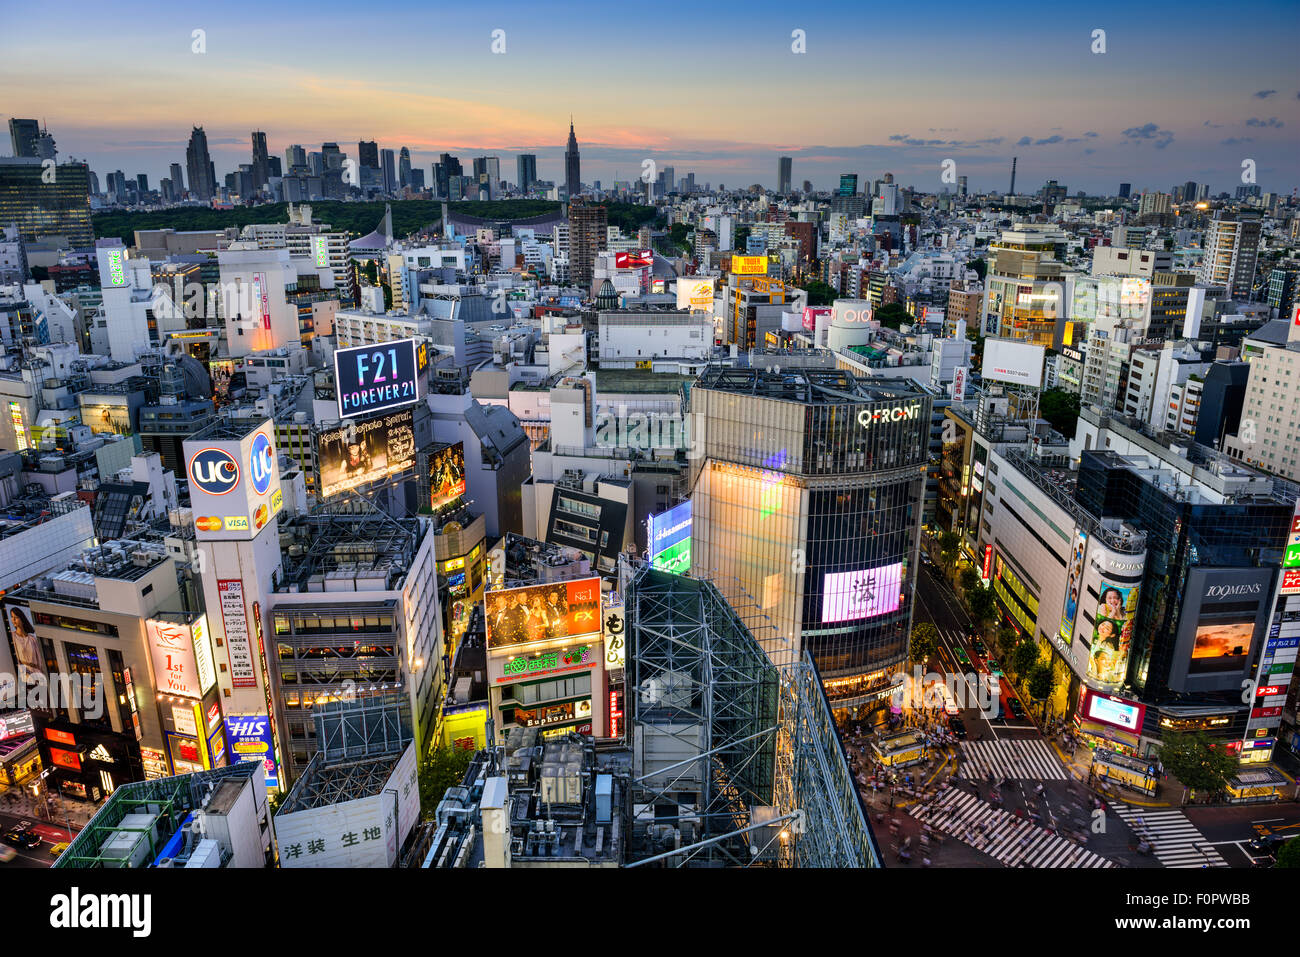 TOKYO, JAPAN - AUGUST 4, 2015: The Shibuya skyline at twilight. Shibuya is considered Tokyo's center for youth fashion and cultu Stock Photo